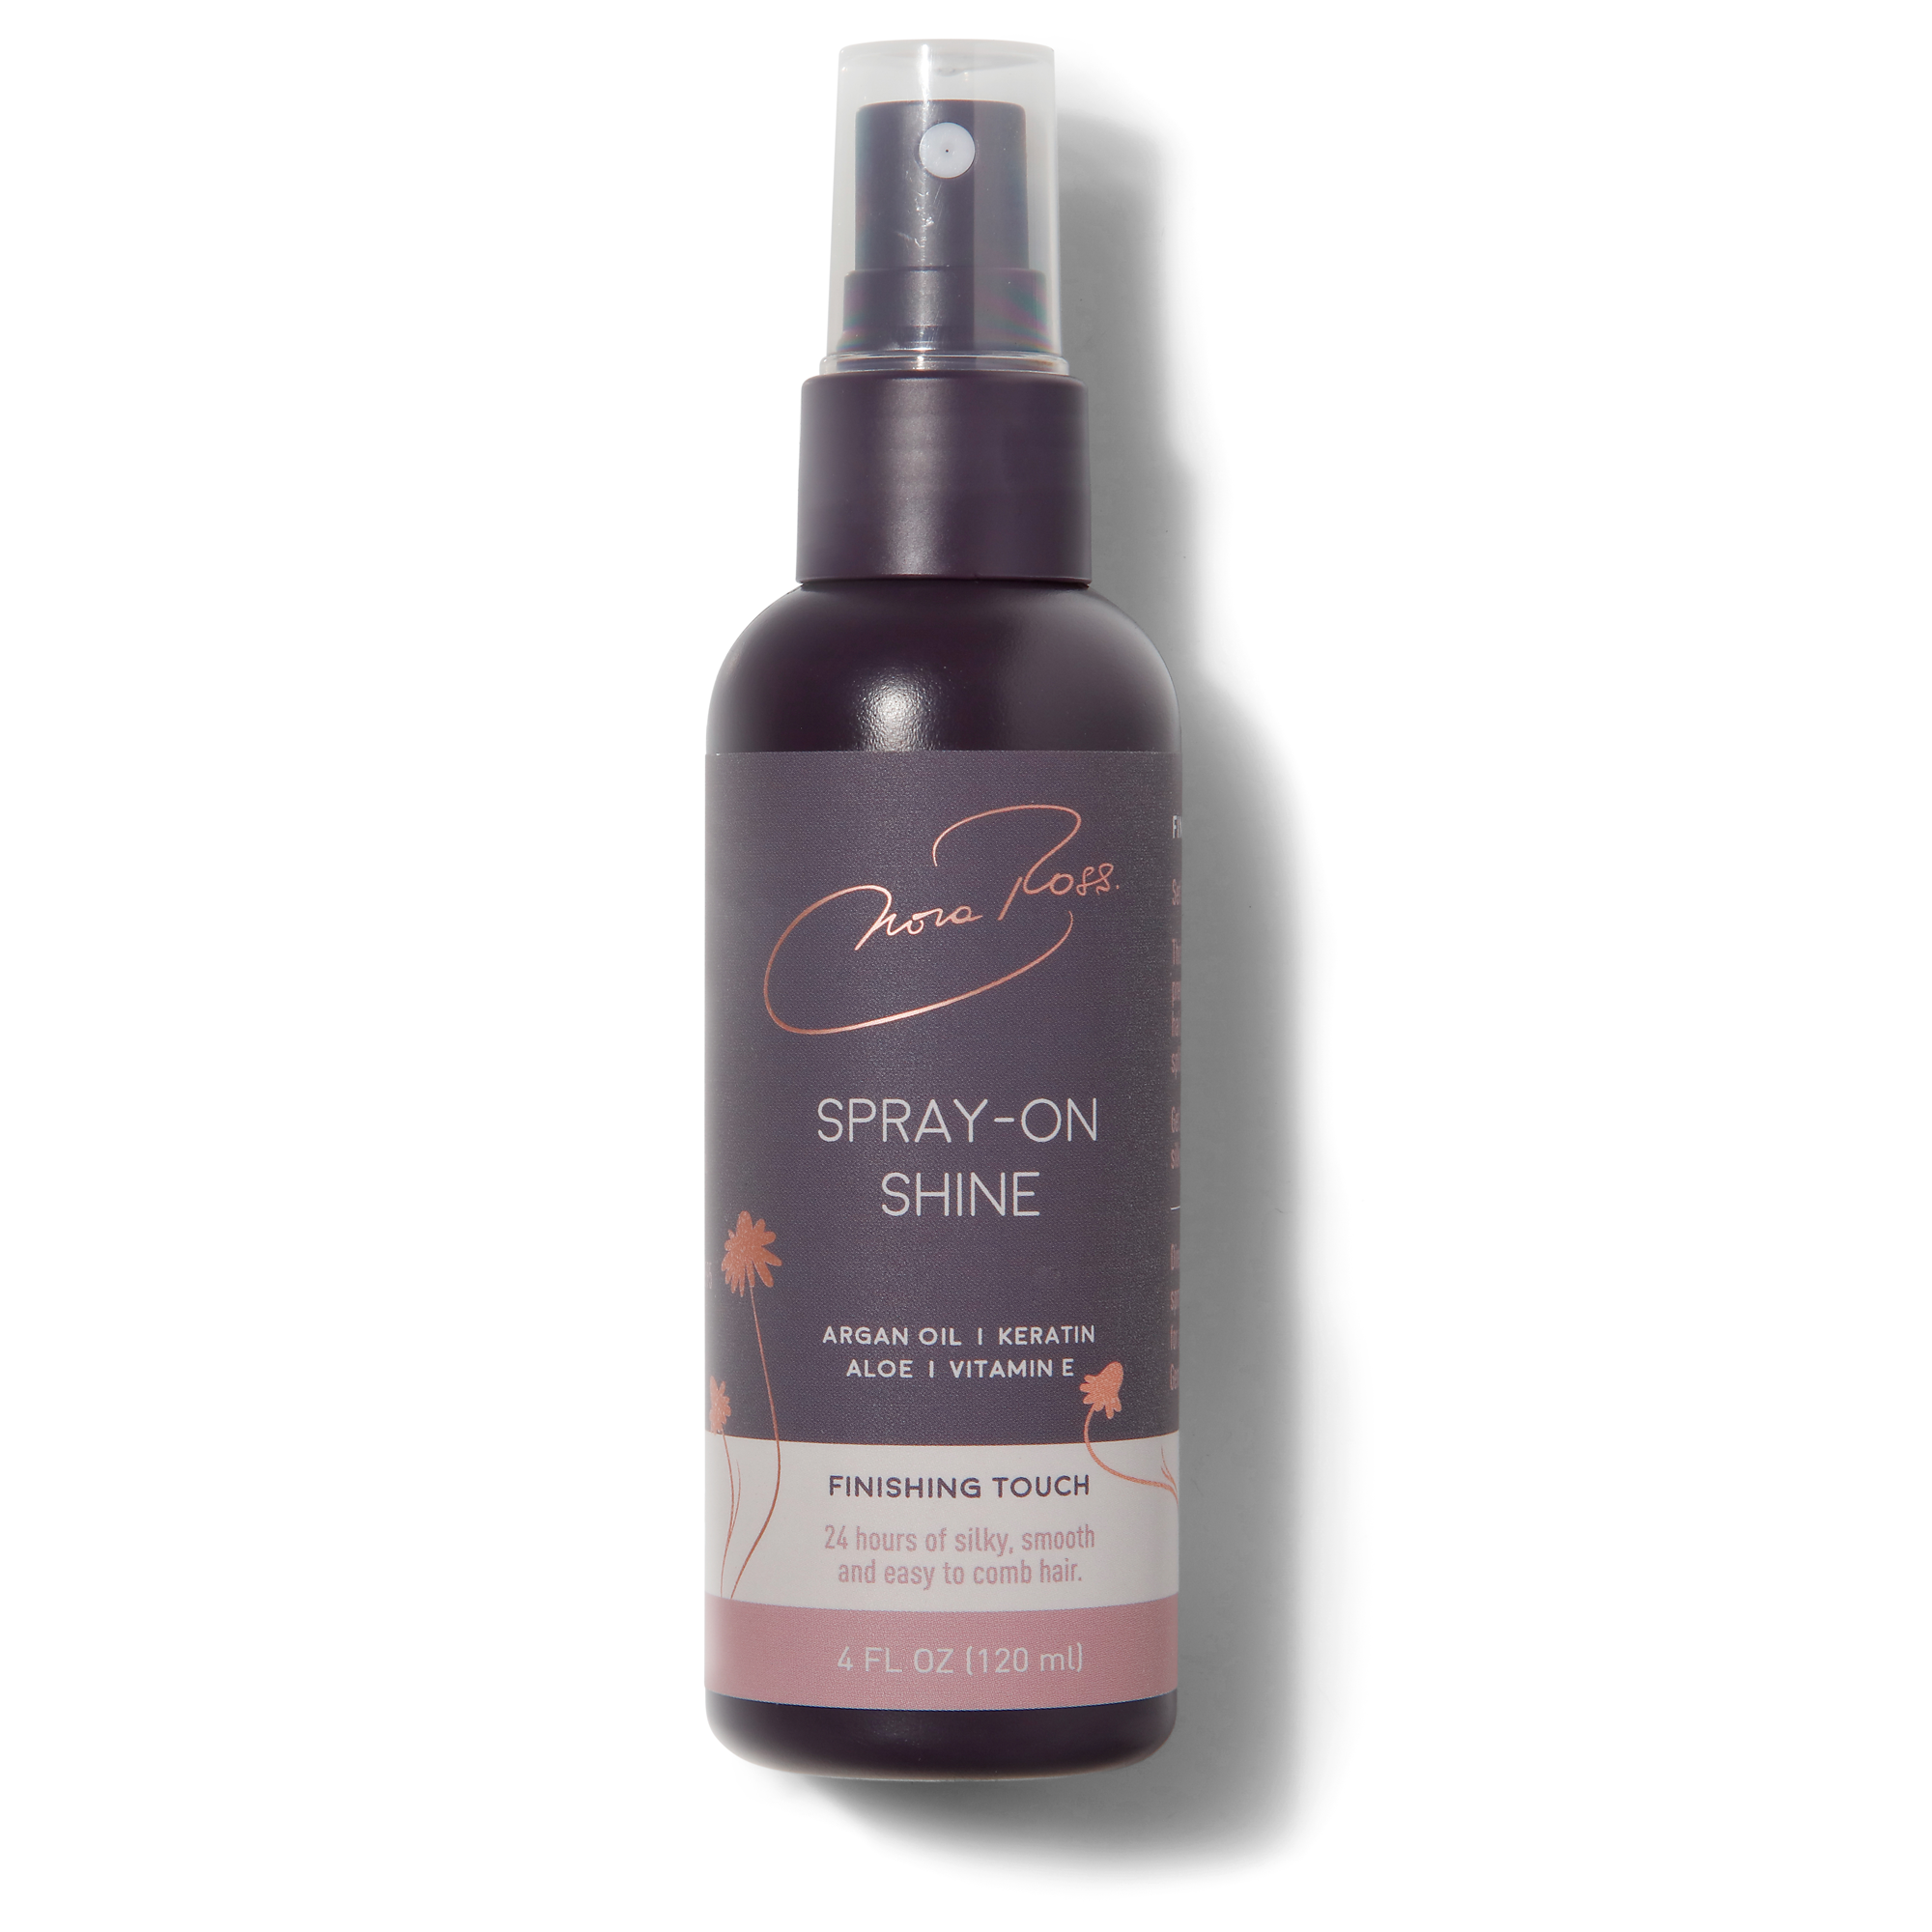 How hair serum can be used in the shower to get shiny locks